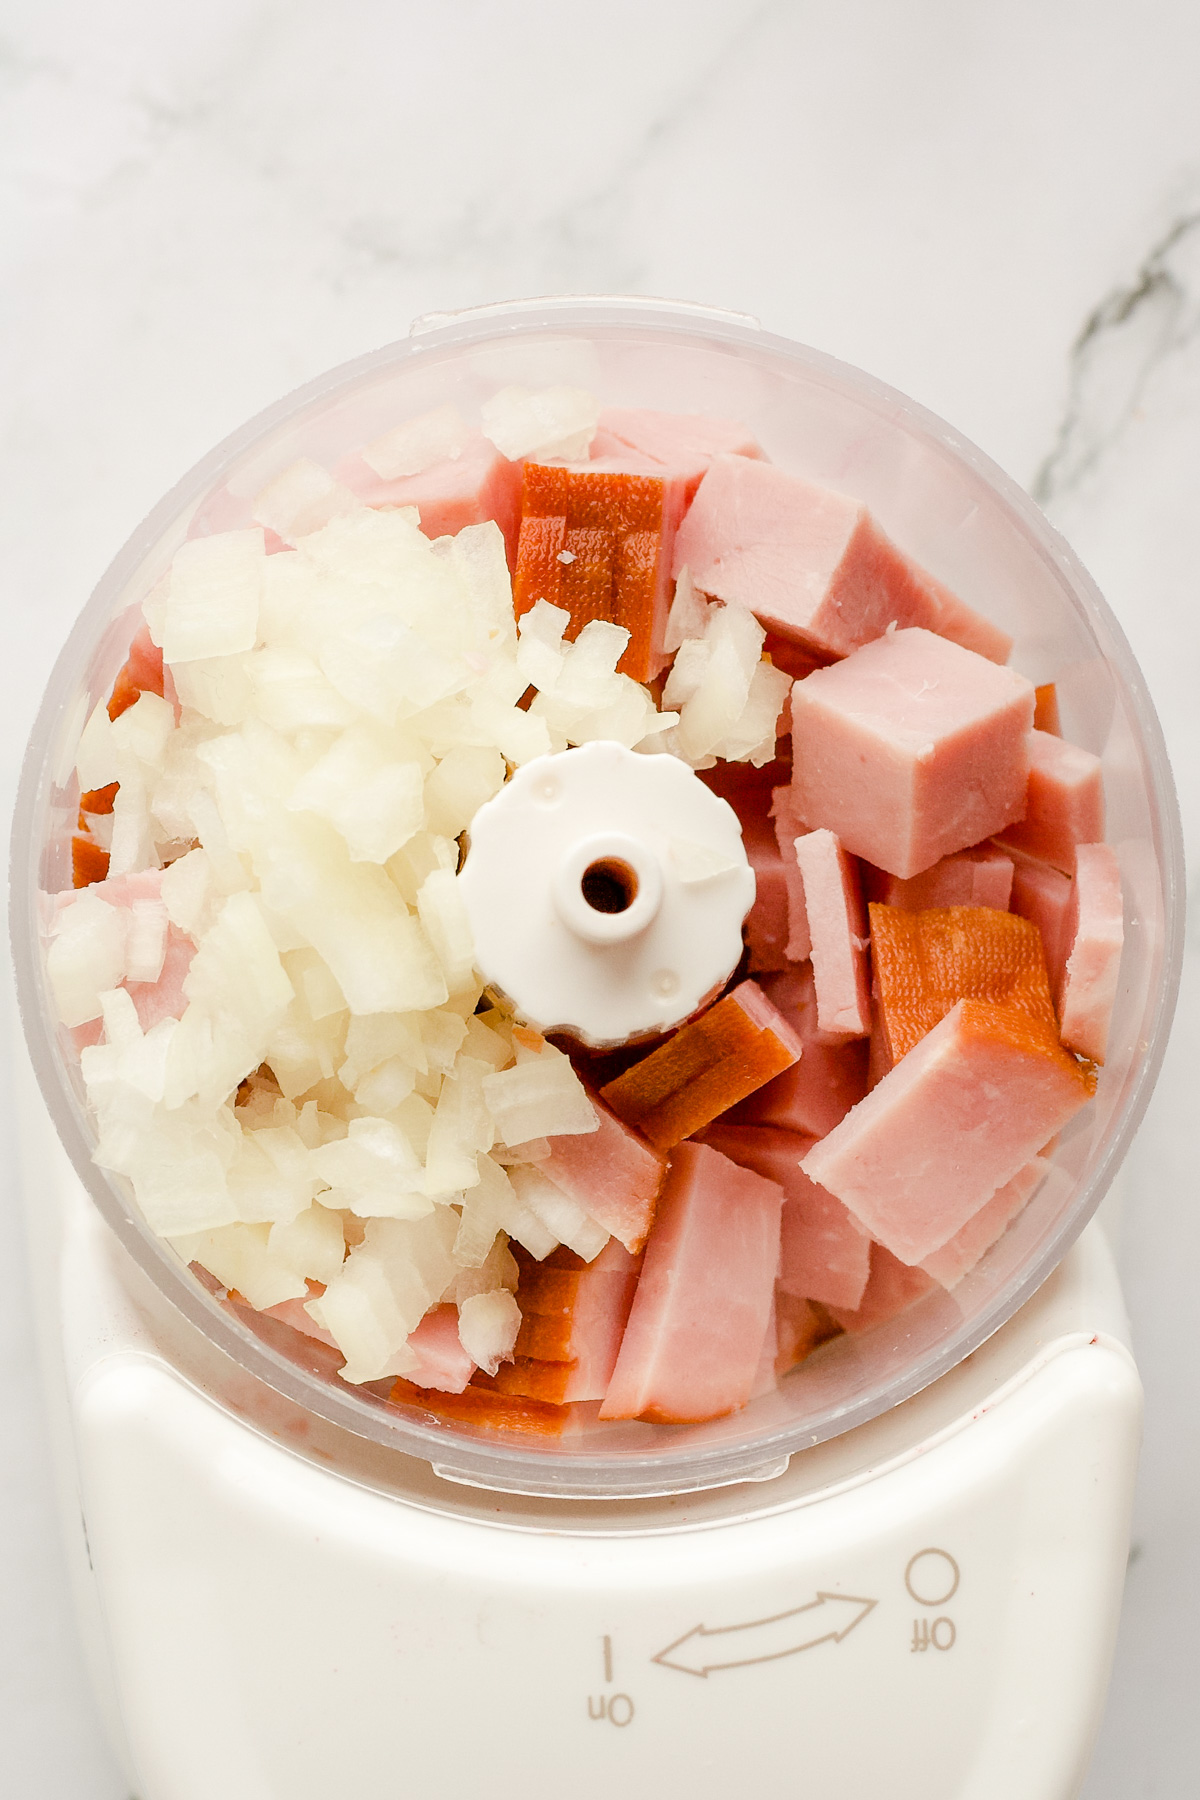 Diced ham and onion in food processor